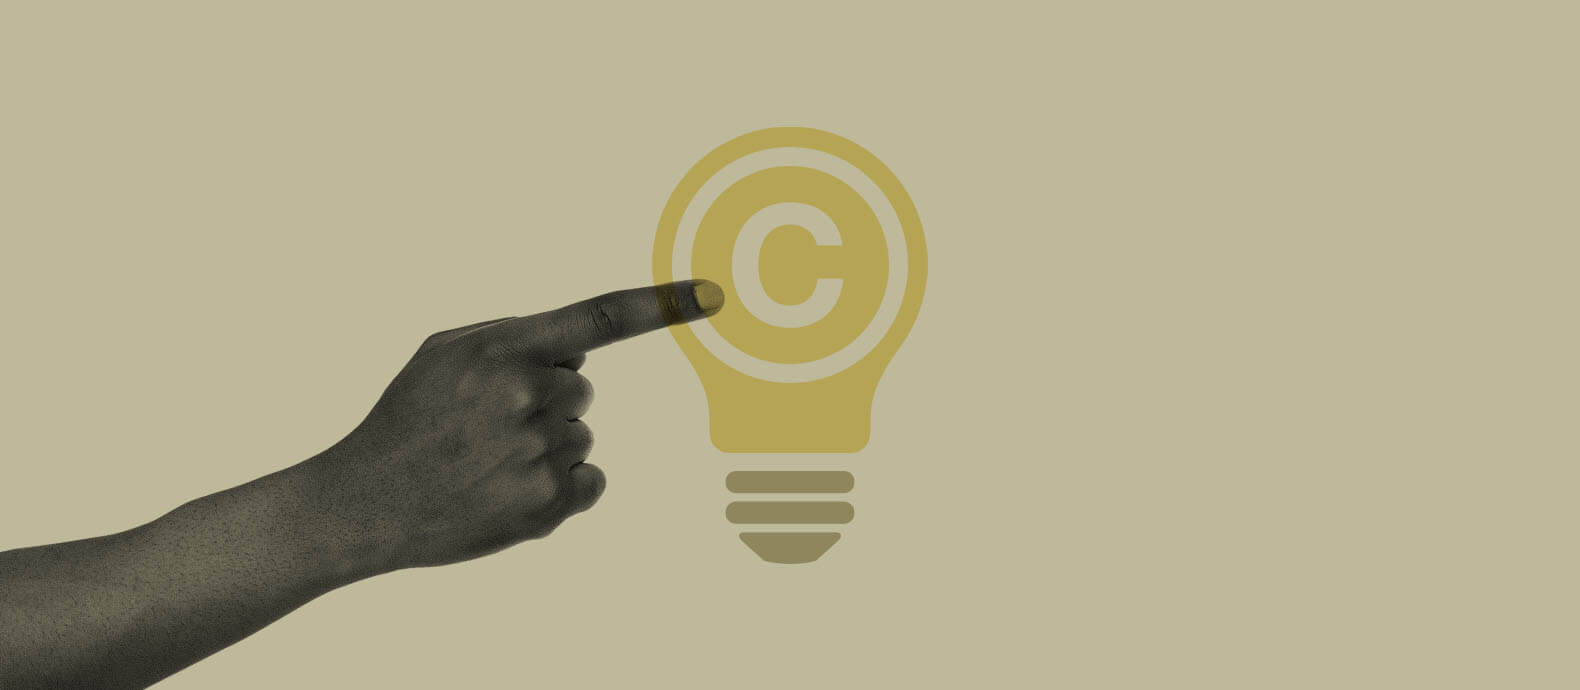 How to copyright an idea and protect your rights